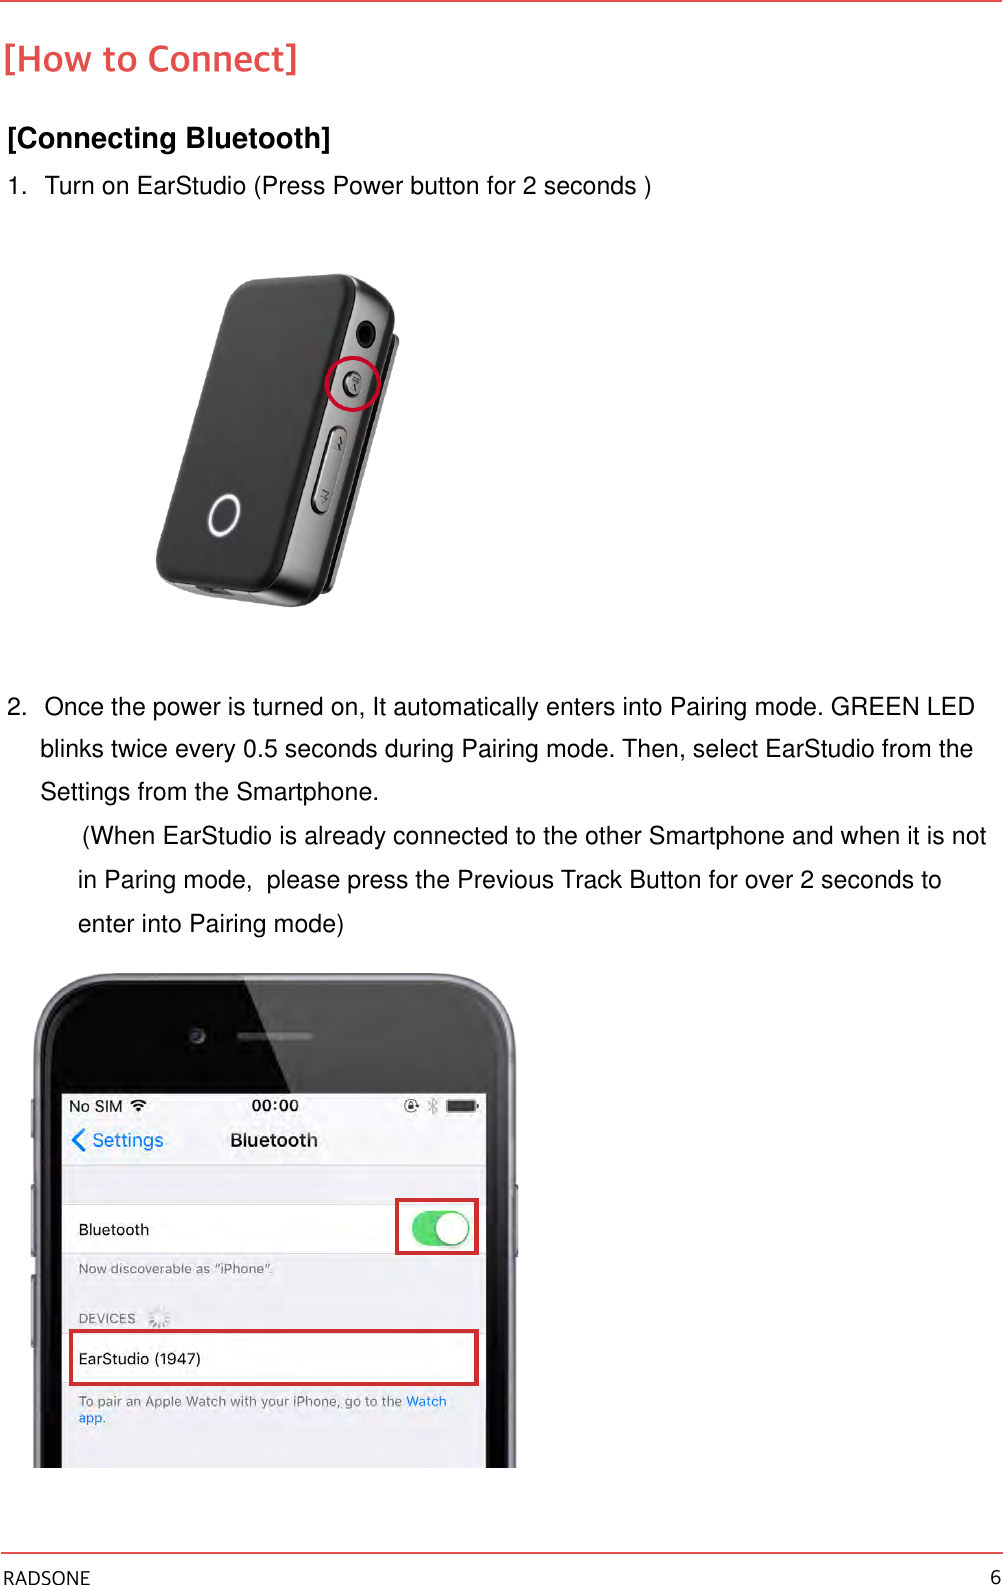 [How to Connect] [Connecting Bluetooth] 1. Turn on EarStudio (Press Power button for 2 seconds )  2. Once the power is turned on, It automatically enters into Pairing mode. GREEN LED blinks twice every 0.5 seconds during Pairing mode. Then, select EarStudio from the Settings from the Smartphone.  (When EarStudio is already connected to the other Smartphone and when it is not in Paring mode,  please press the Previous Track Button for over 2 seconds to enter into Pairing mode)   RADSONE 6